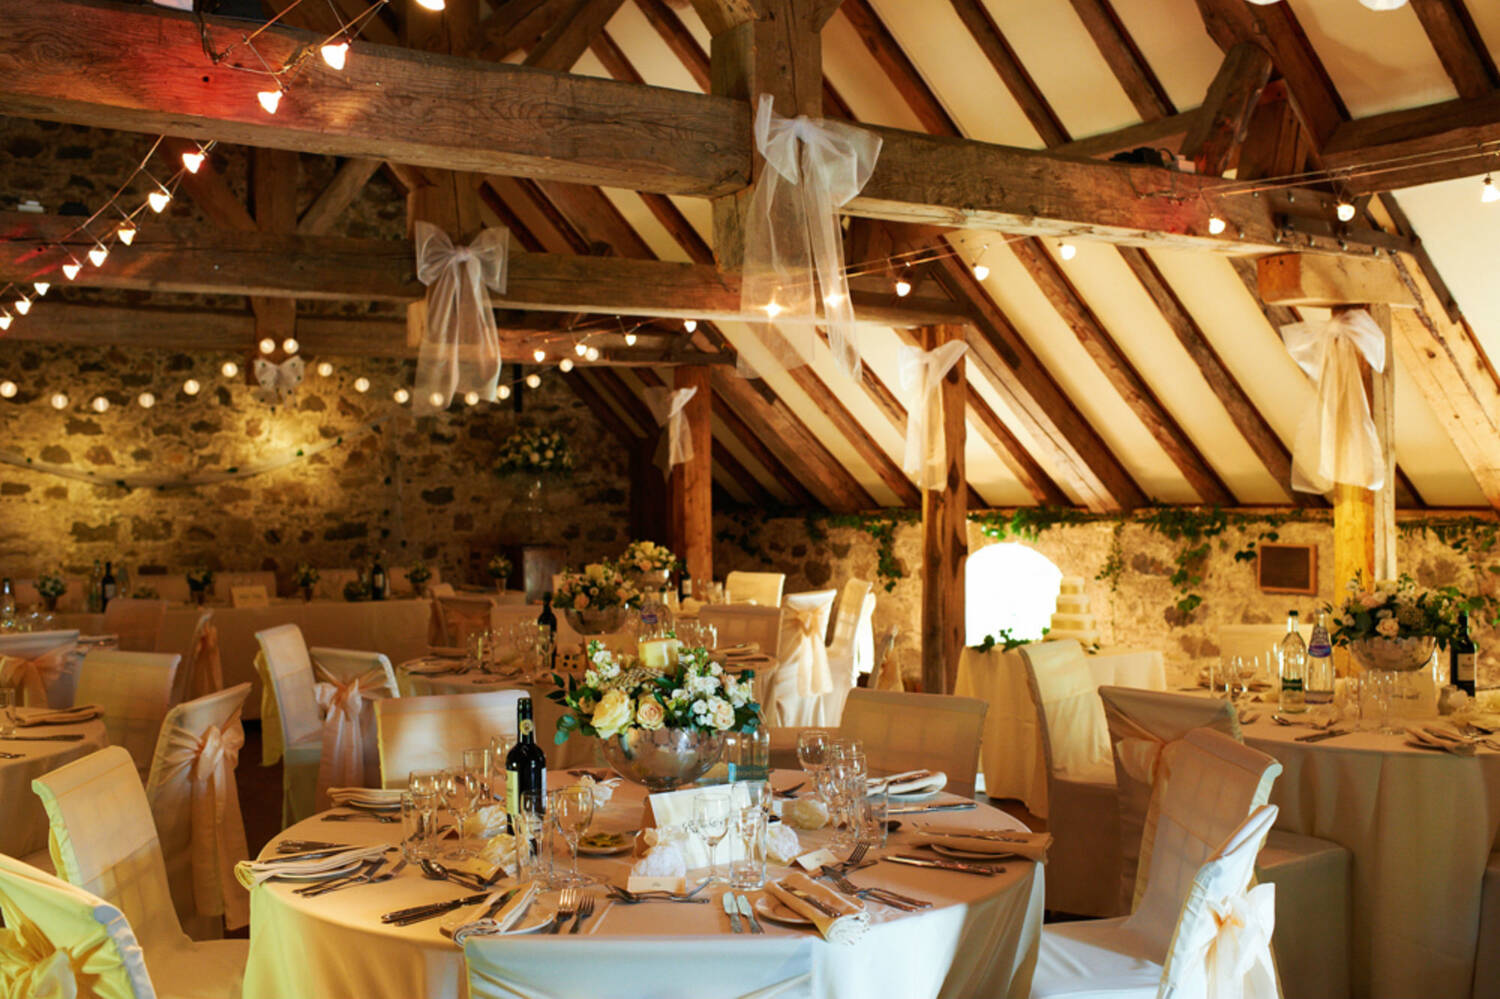 Inside a stone barn with wooden rafters, strung with fairy lights. Round tables have been set up for a wedding reception.